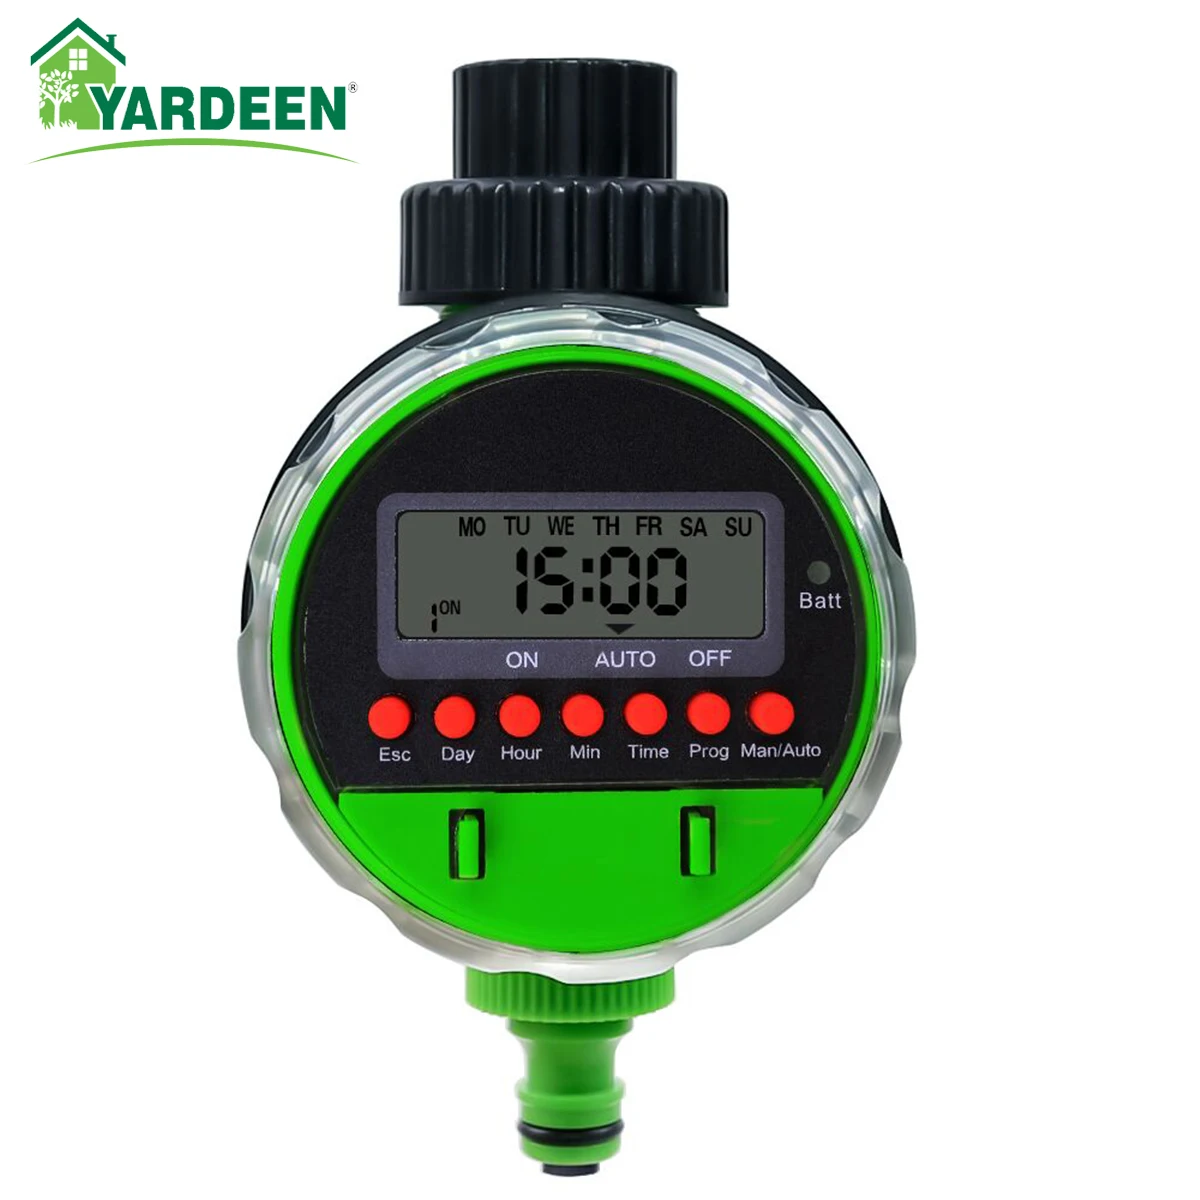 No Water Pressure Required Yardeen Dual Outlet Water Timer Irrigation Controller System 